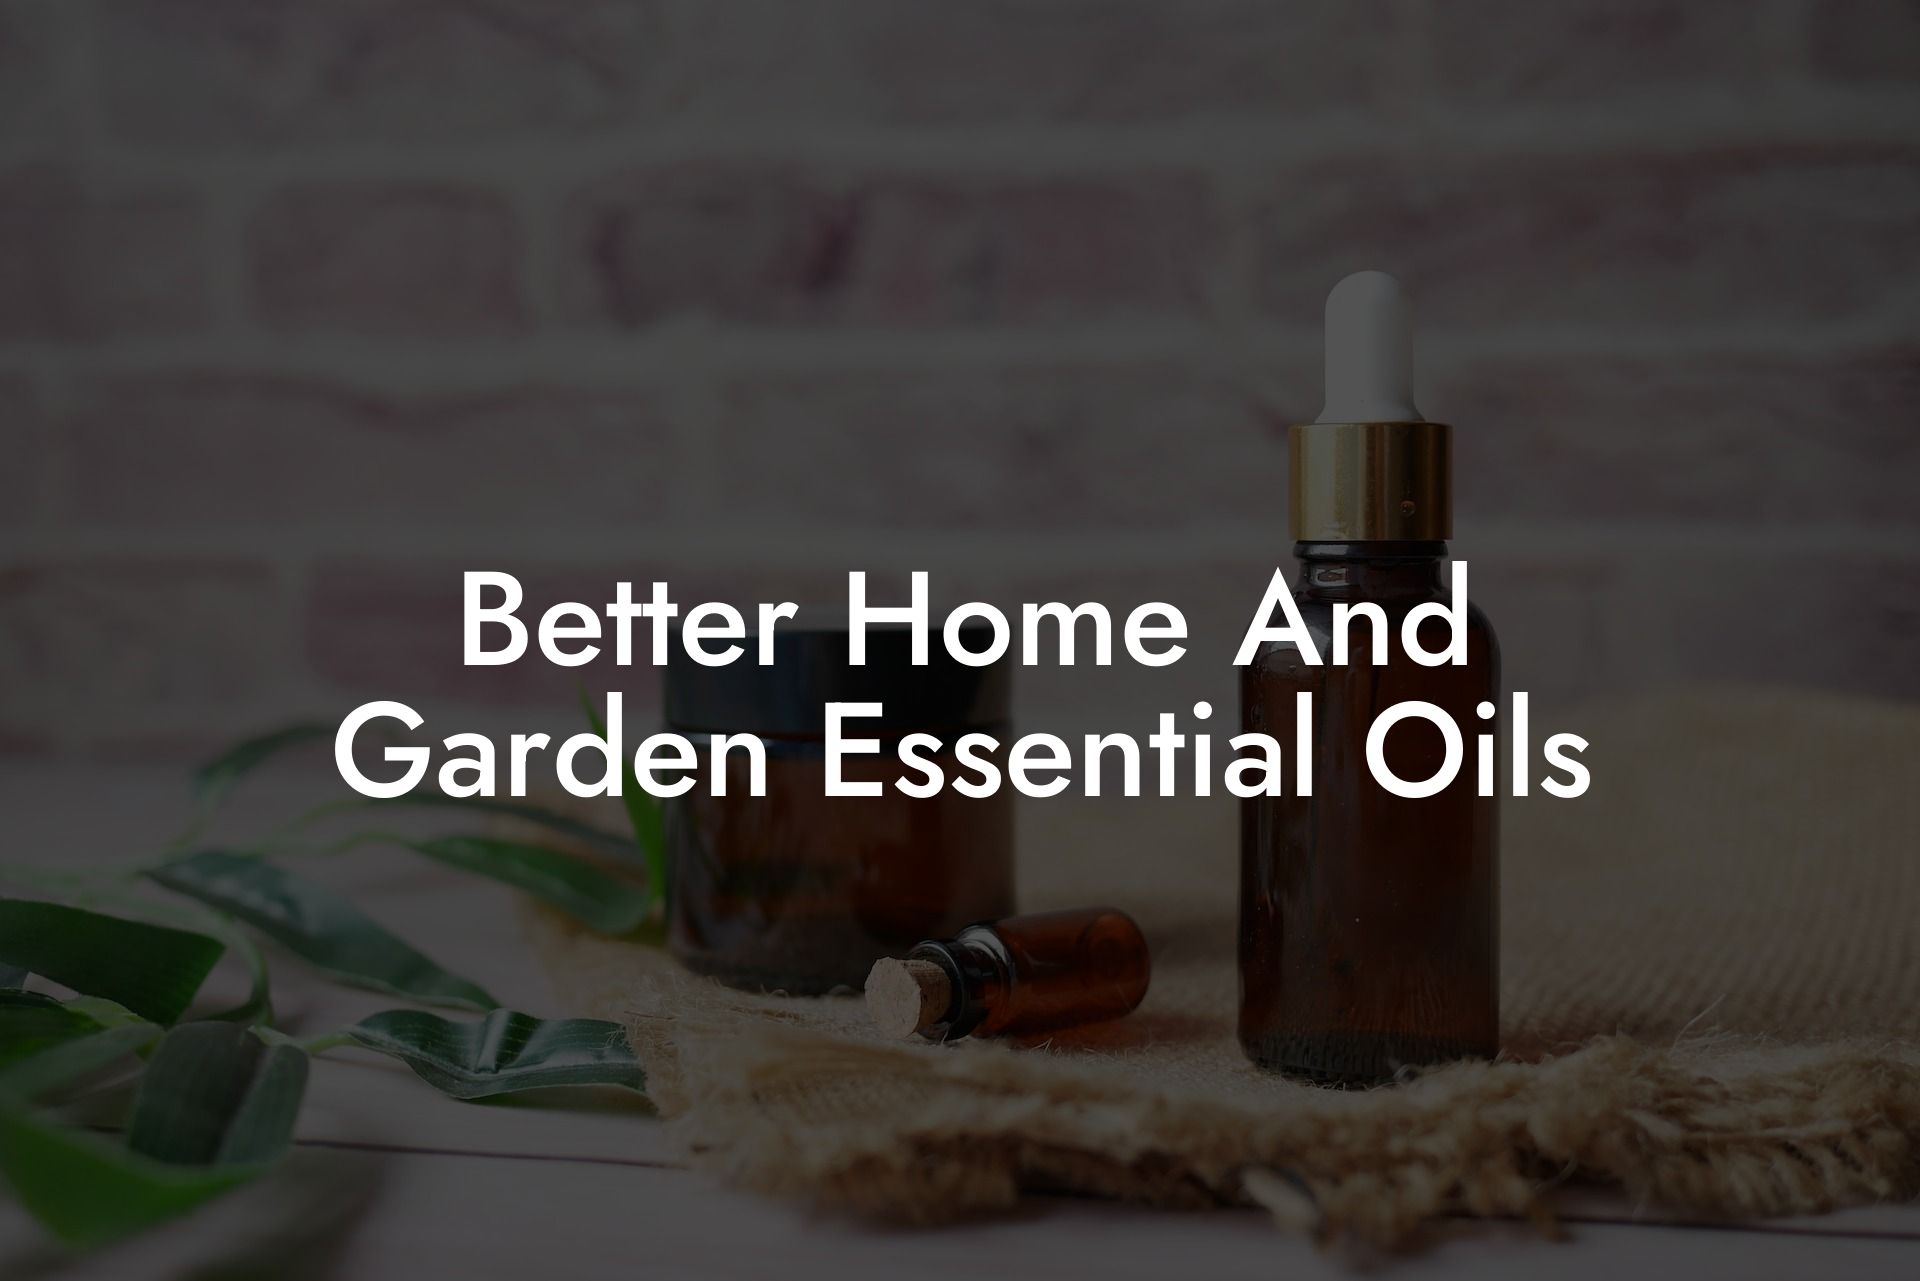 Better Home And Garden Essential Oils